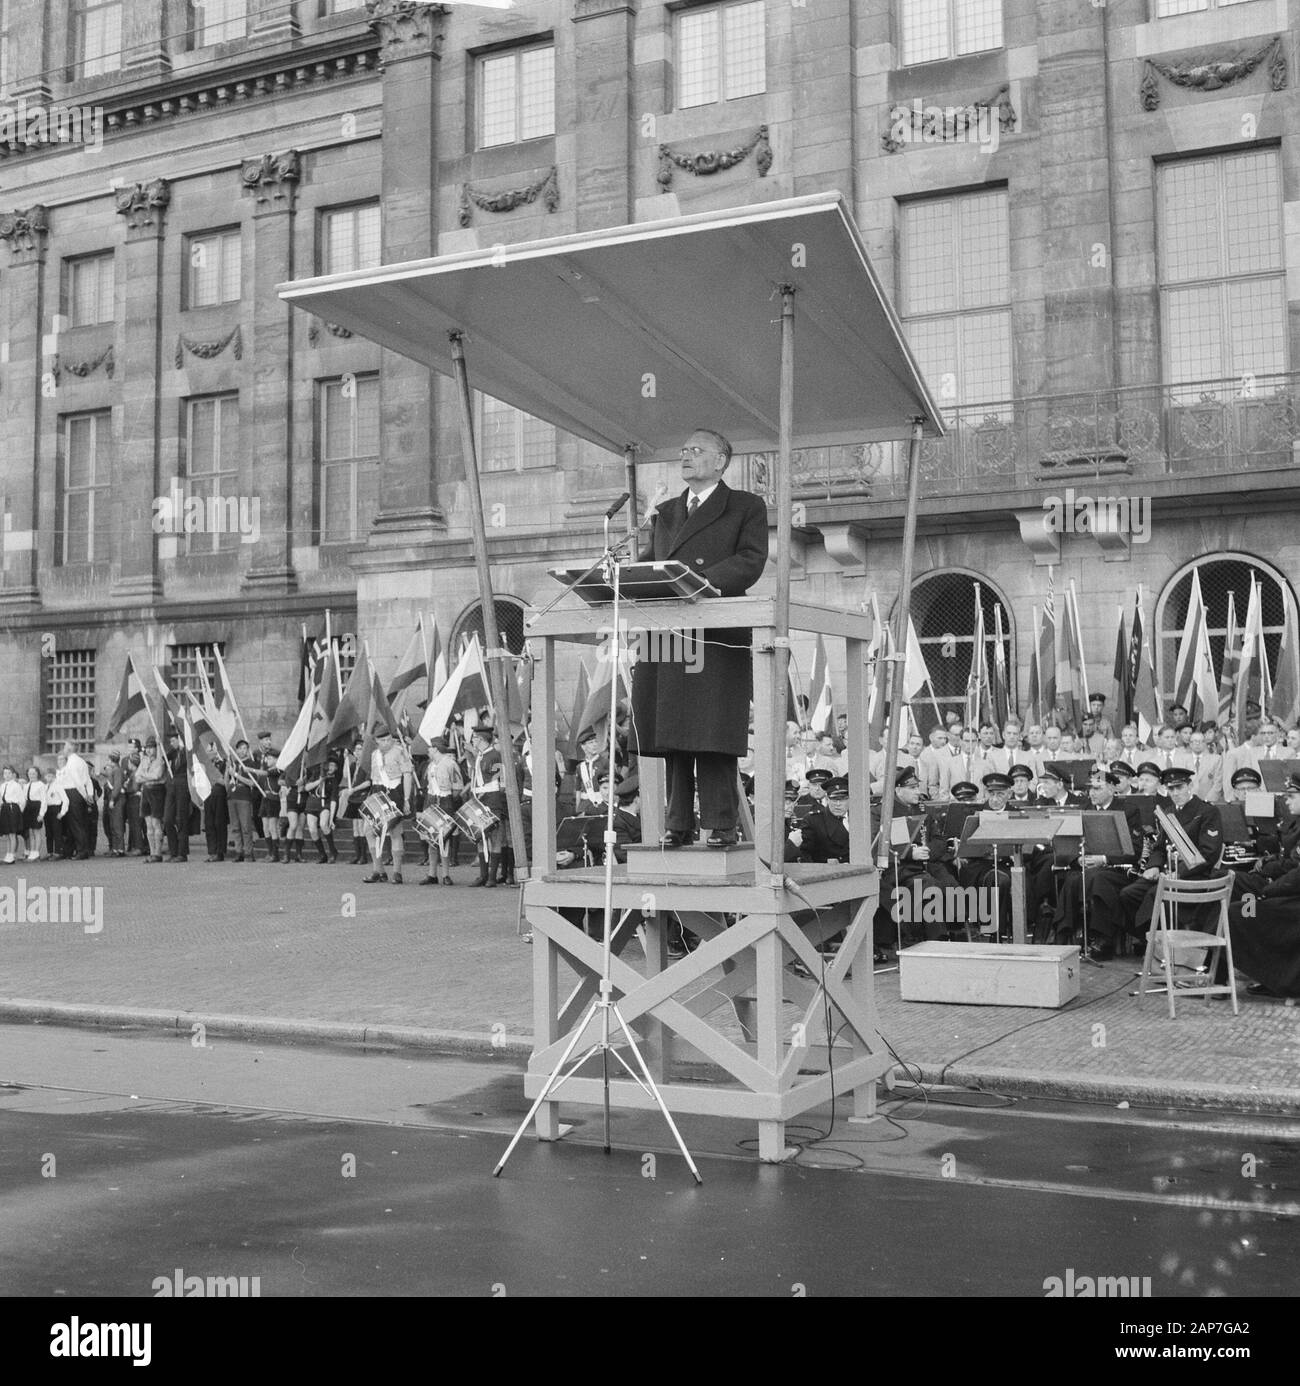 United Nations Day in Amsterdam. Dr. Willem Drees during speech Date: 29 October 1961 Location: Amsterdam, Noord-Holland Keywords: Speeches Personal name: Day of the United Nations, Dr. Willem Drees Stock Photo